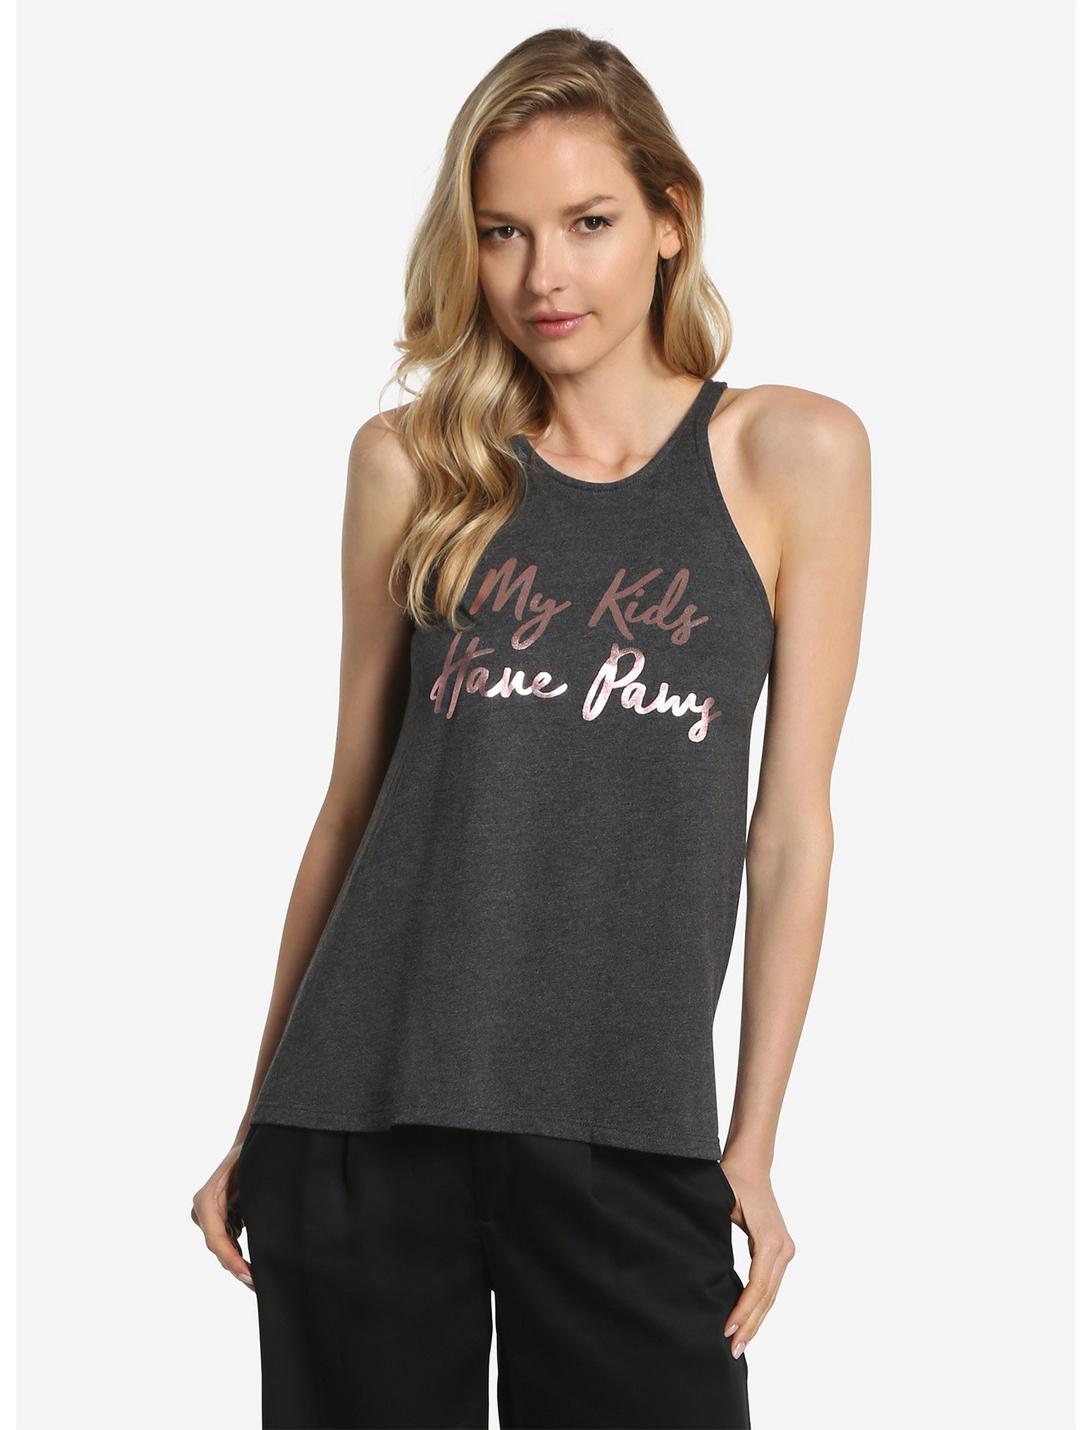 My Kids Have Paws Womens Tank Top, GREY, hi-res